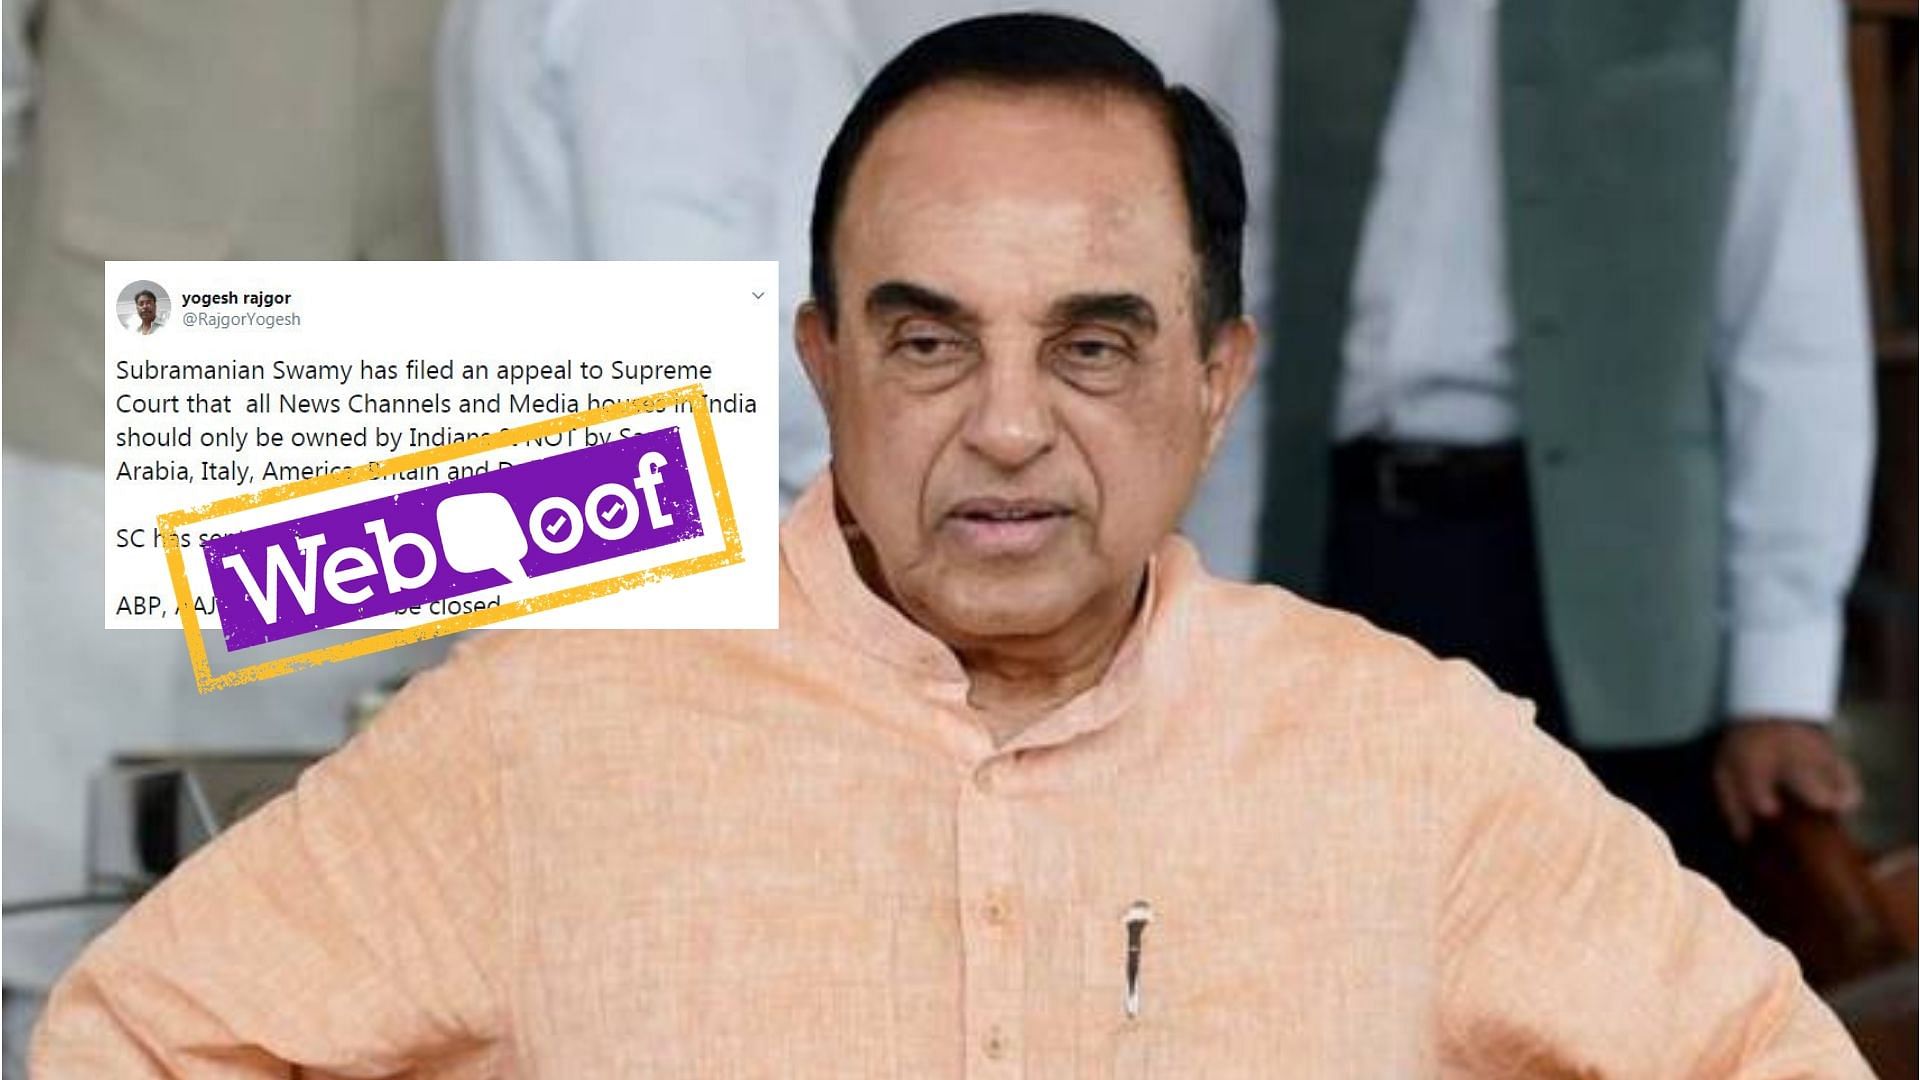 The viral post claimed Subramanian Swamy had filed a petition in the court against the foreign ownership of the Indian media houses. 